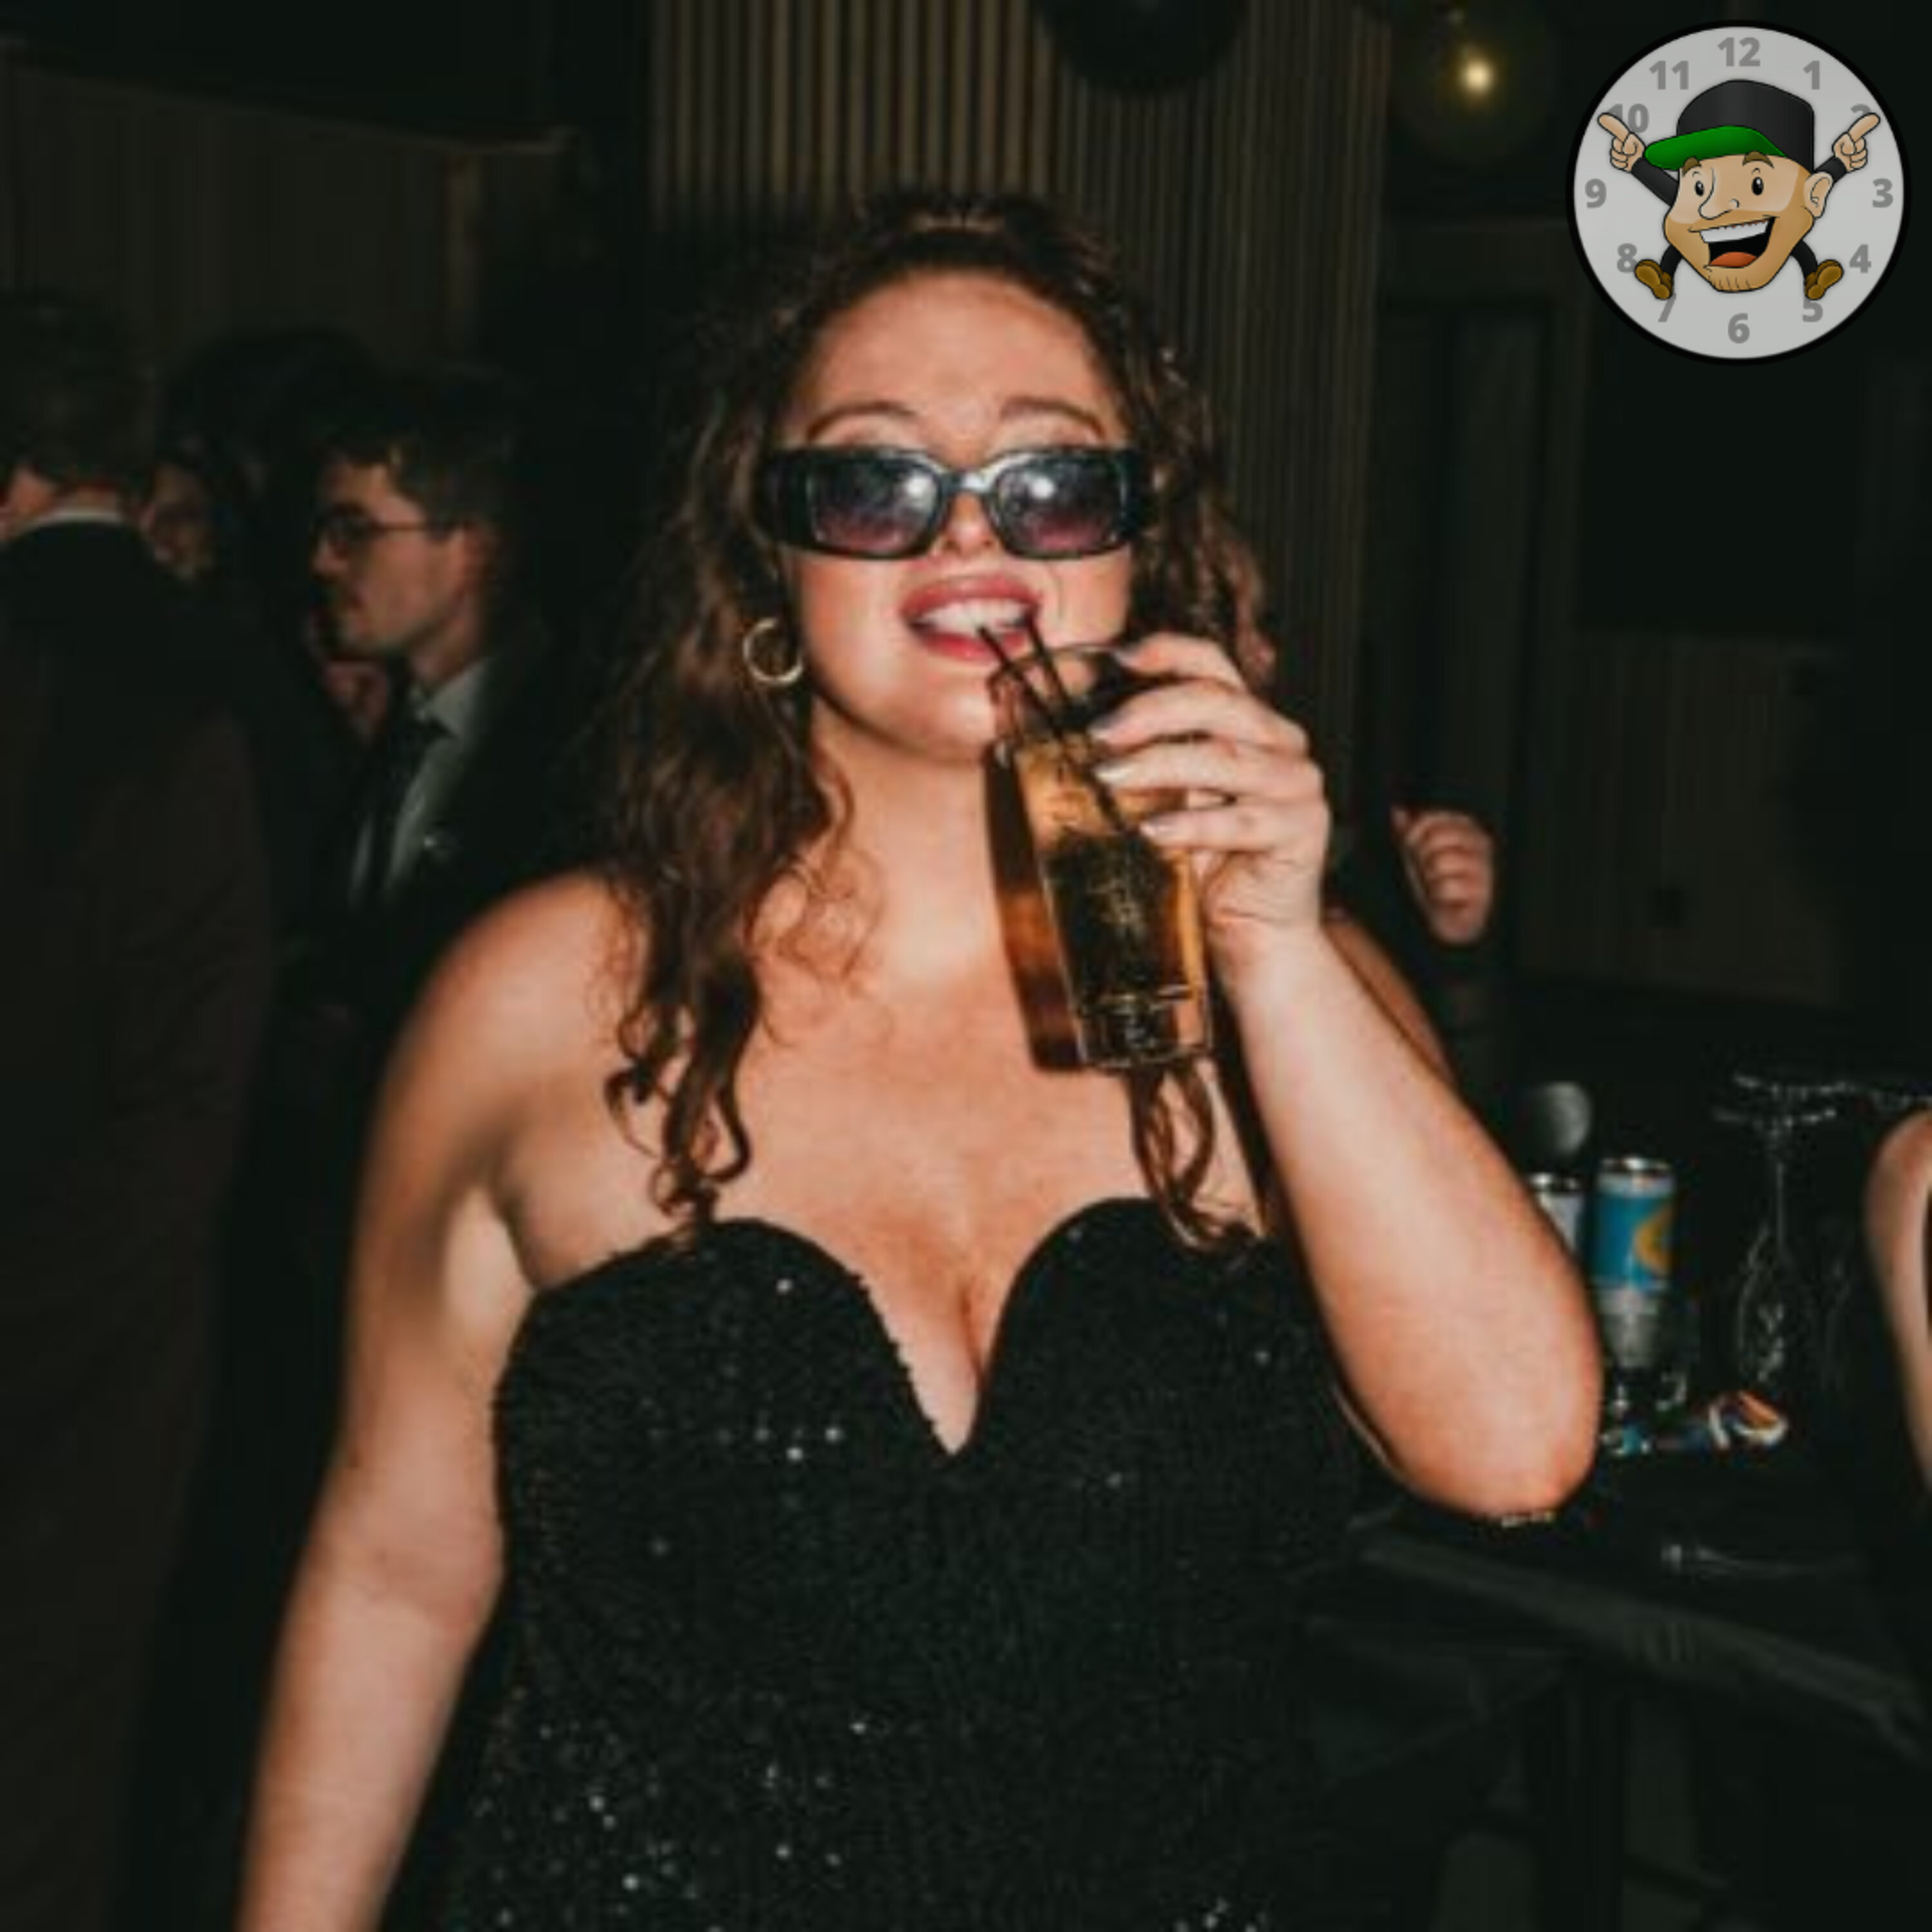 Interview w/ Barstool Sports, Grace O’Malley